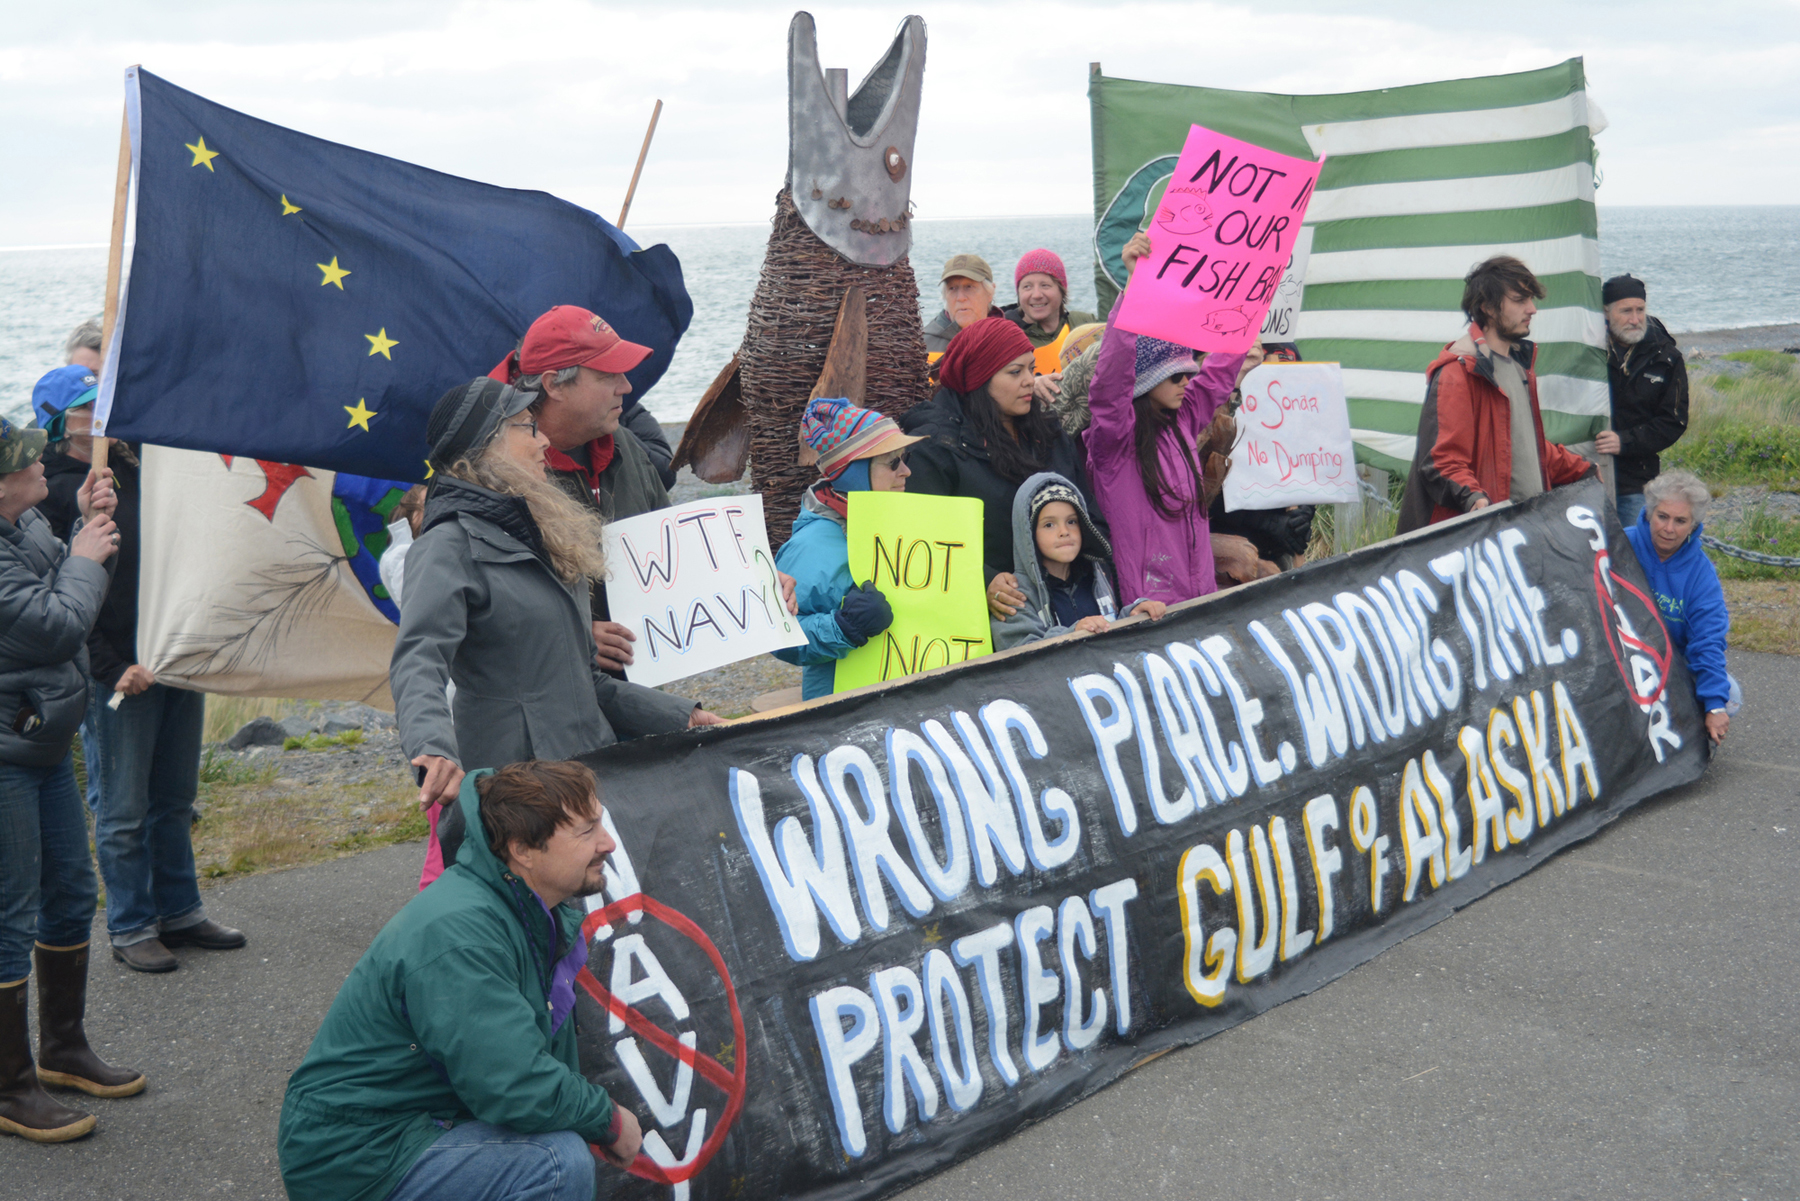 Protesters hold flags, sign and banners at a rally on Friday afternoon at the Seafarers Memorial on the Homer Spit. The protest was aimed at Northern Edge, a joint military exercise running June 15-26 in the Gulf of Alaska.-Photo by Michael Armstrong, Homer News